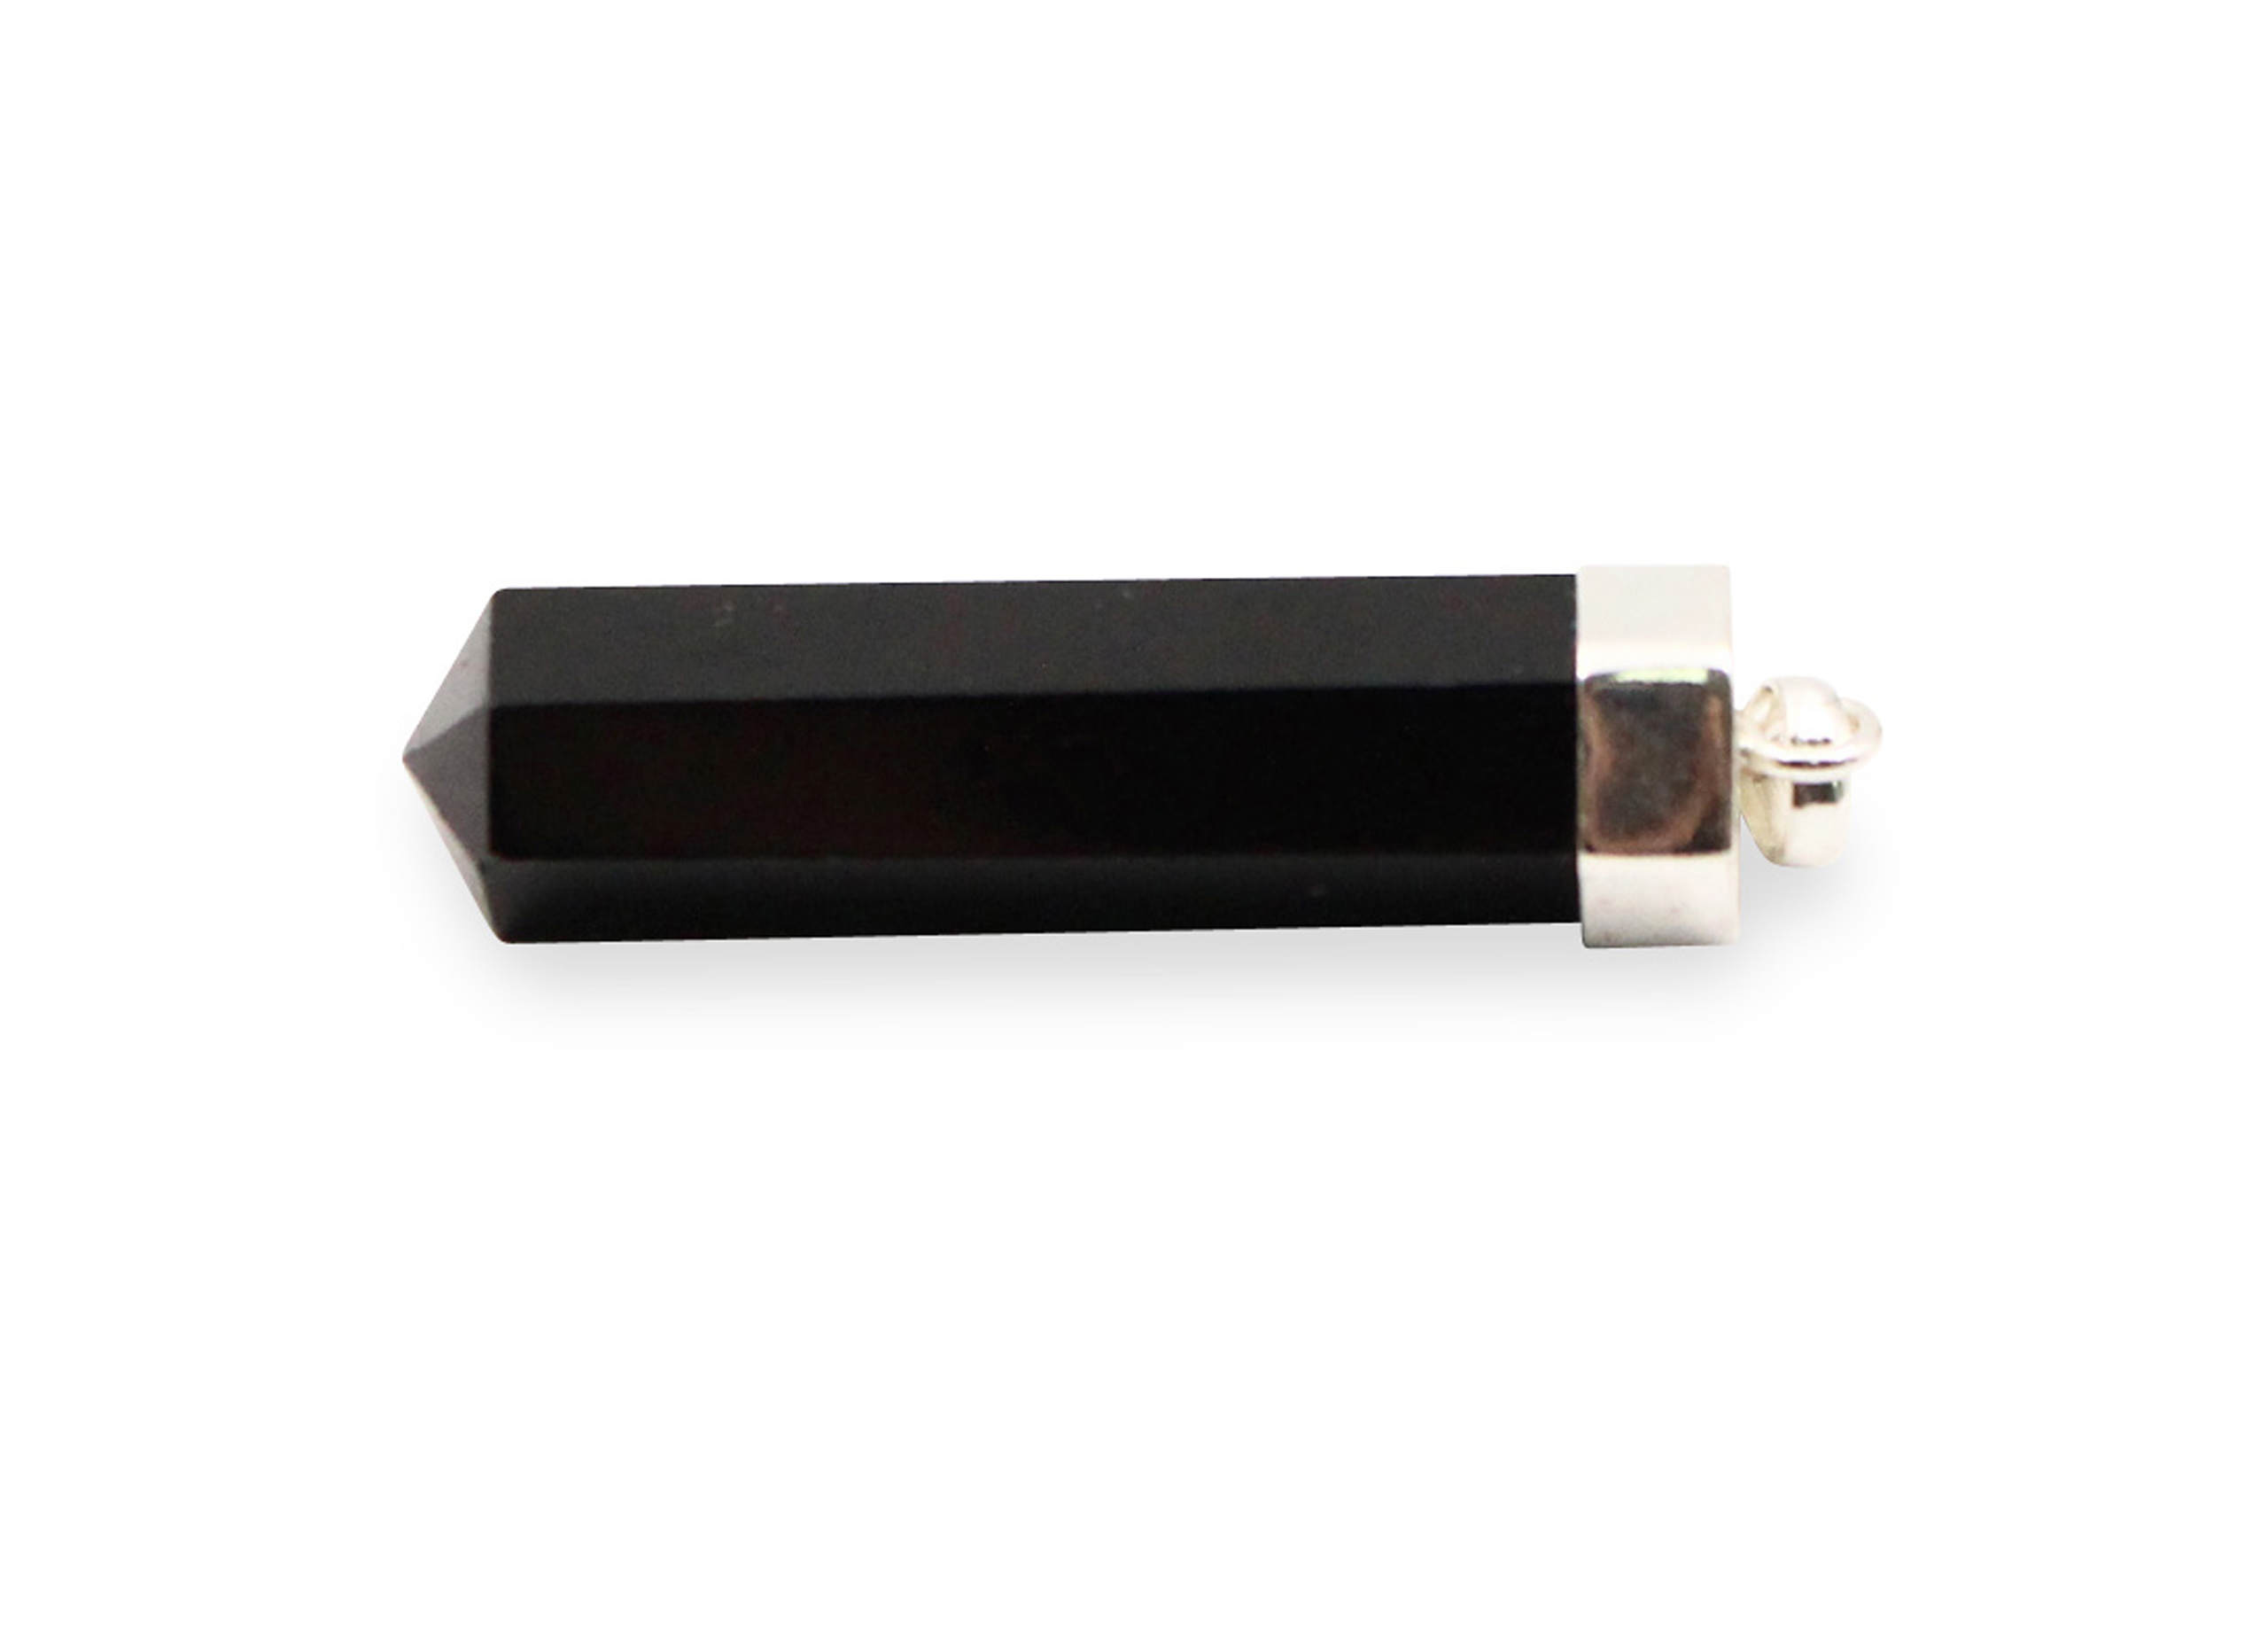 Black Tourmaline "Polished Point" Pendant Sterling Silver - Crystal Dreams